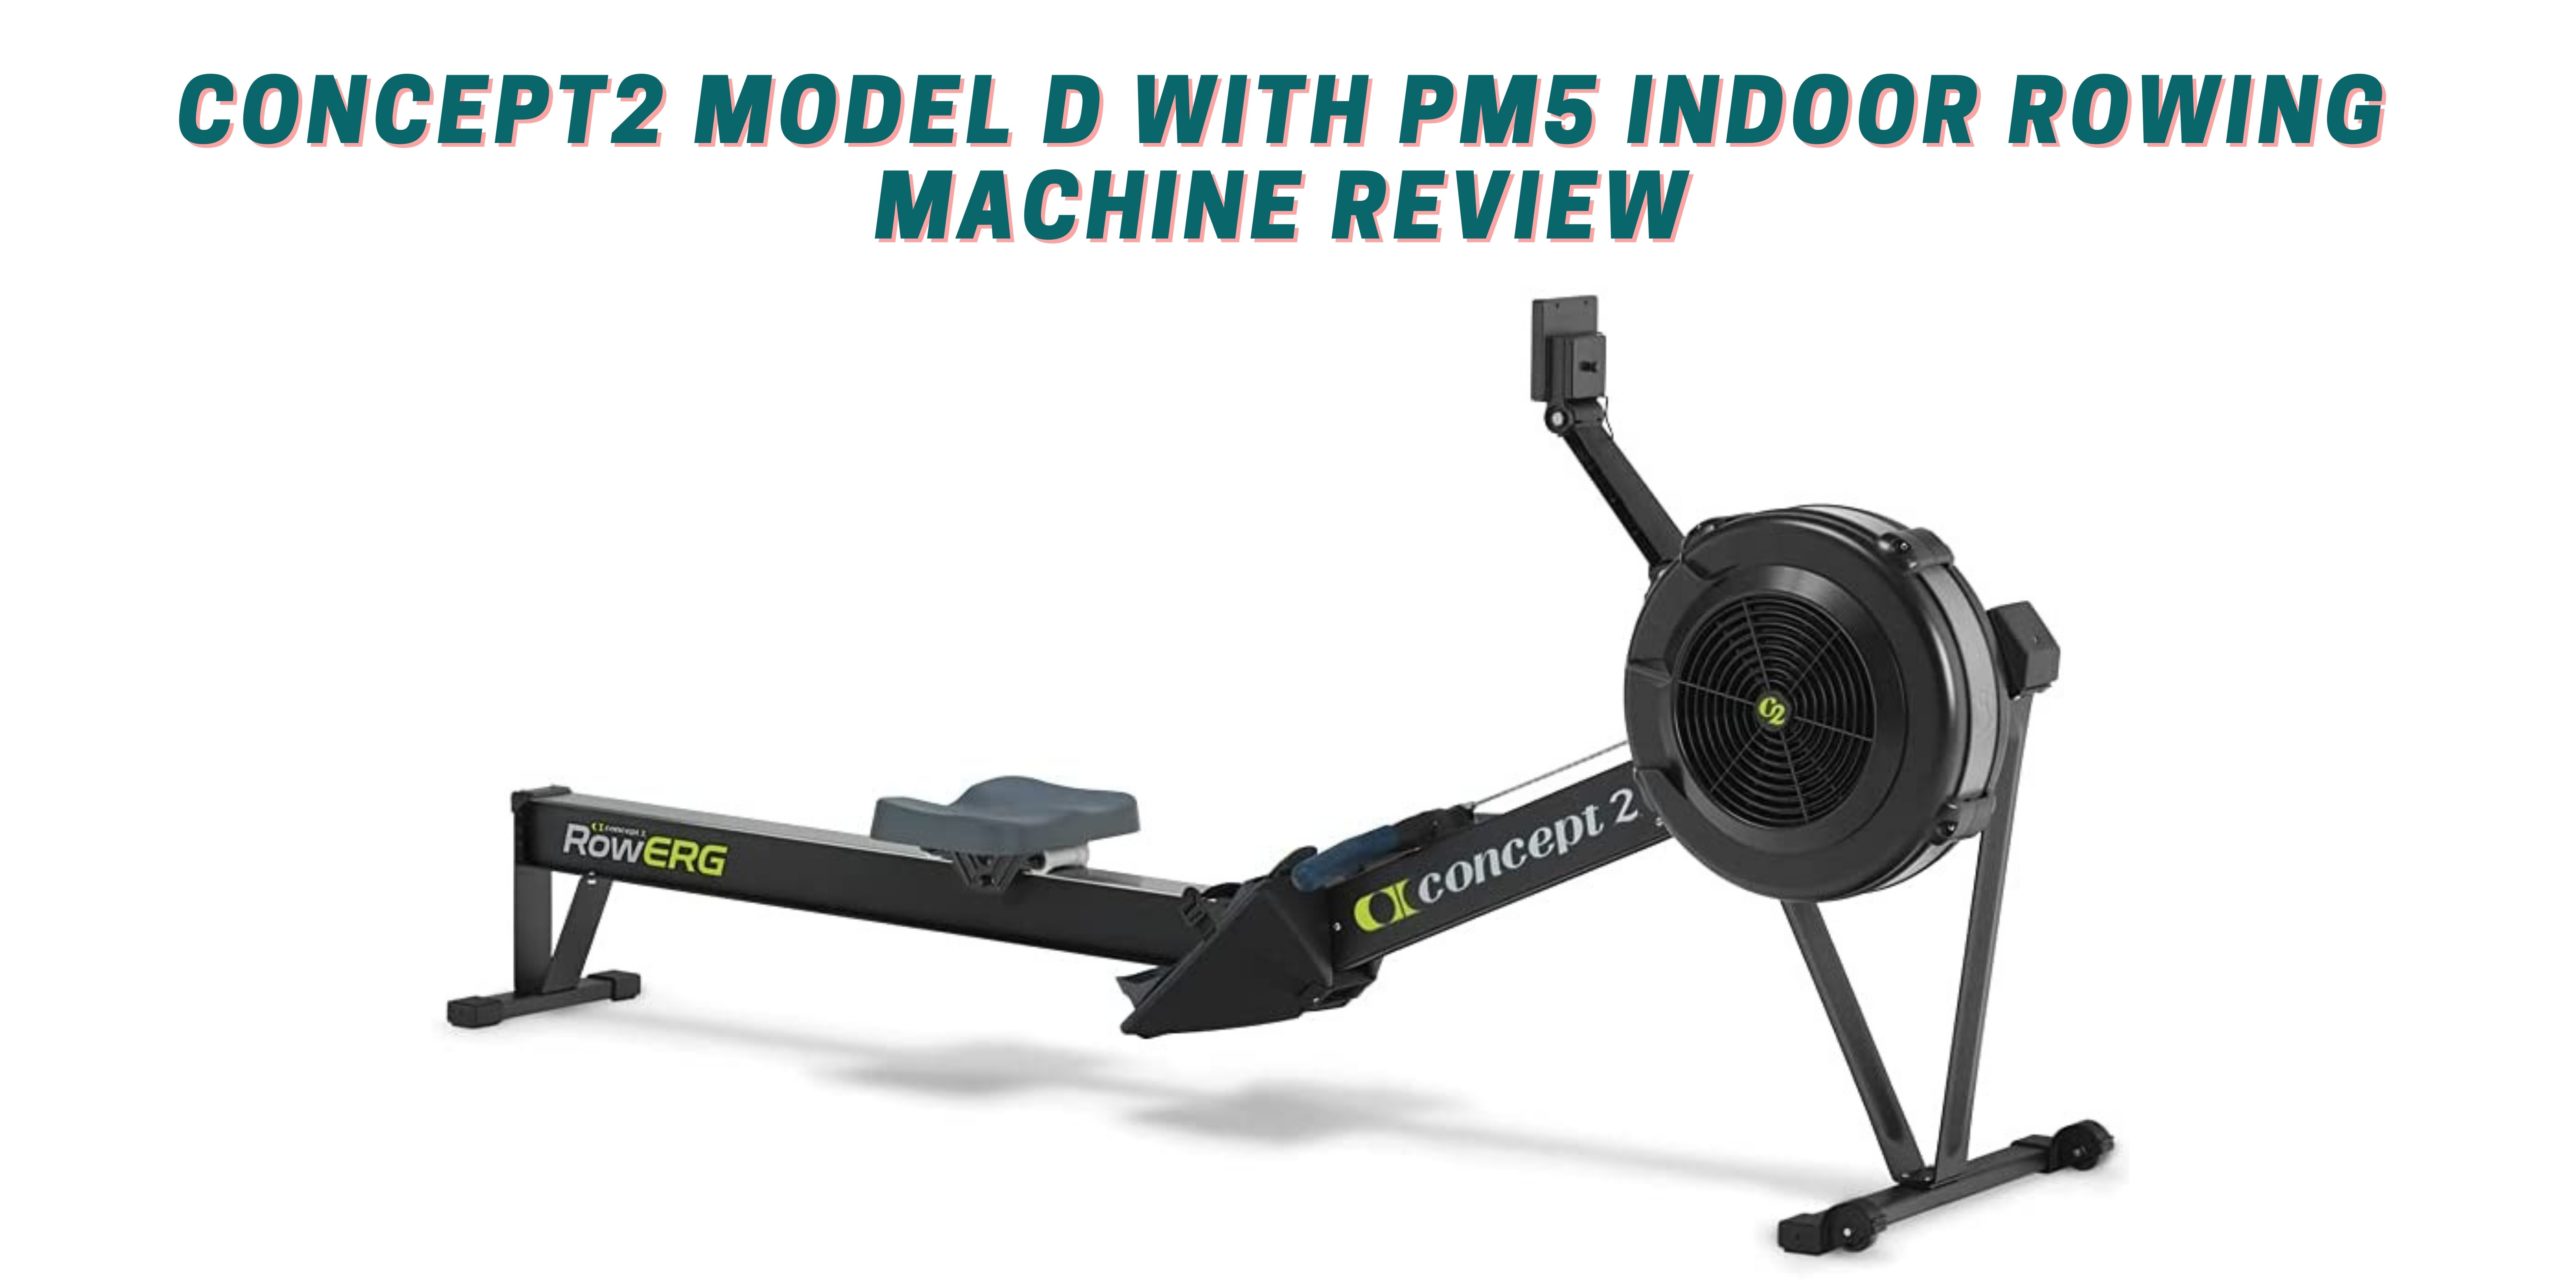 Concept2 Model D with PM5 Indoor Rowing Machine Review scaled